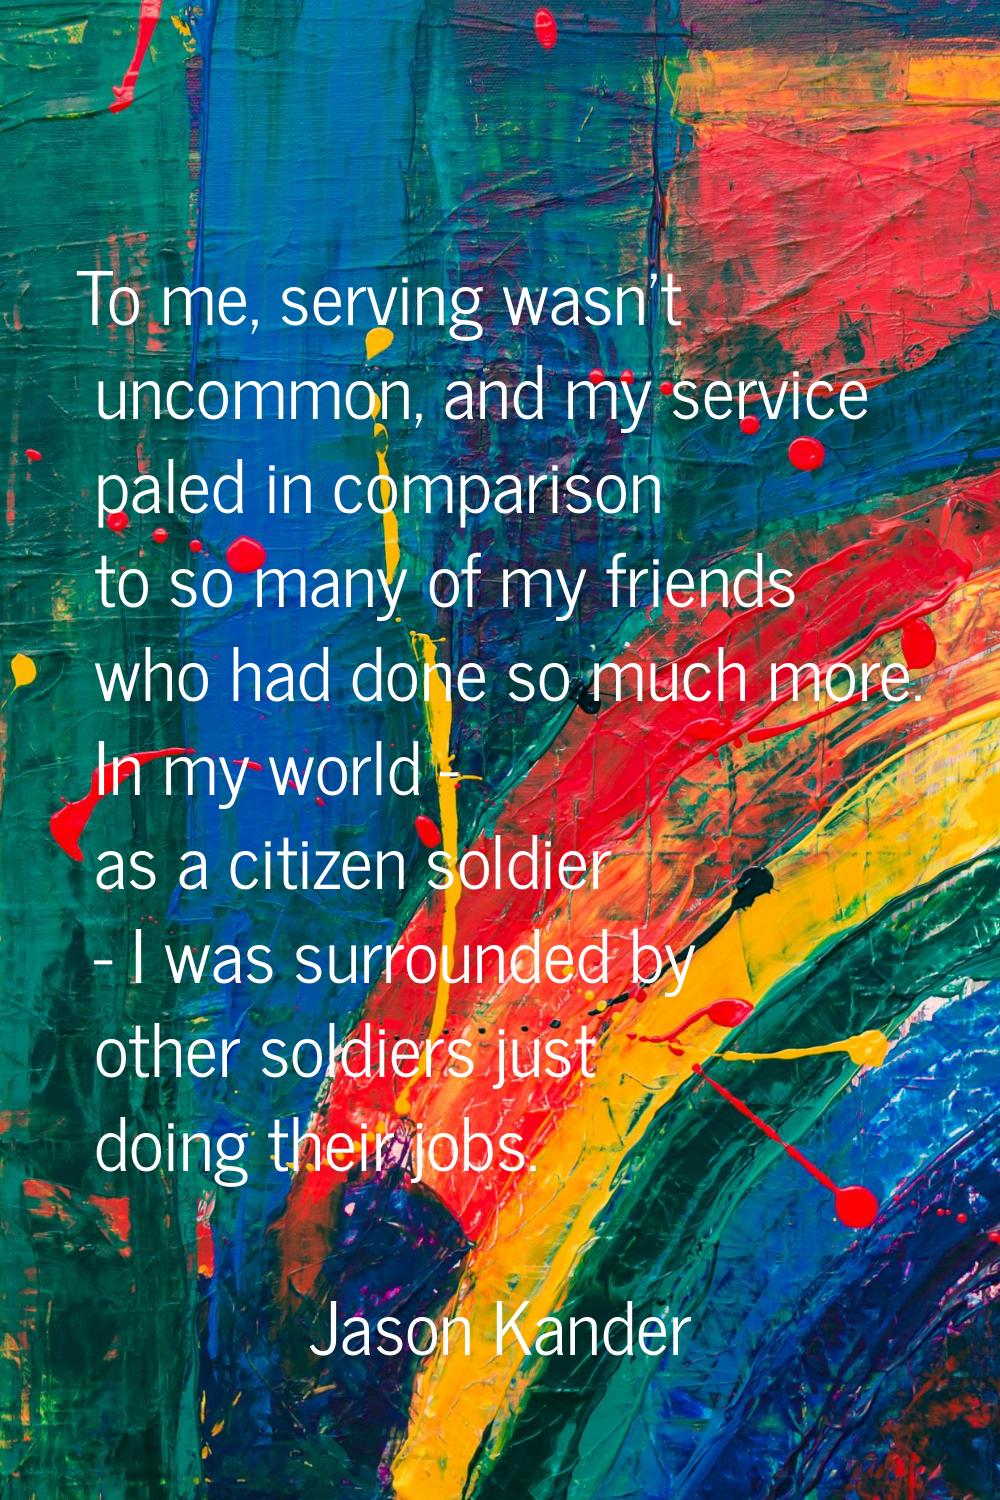 To me, serving wasn't uncommon, and my service paled in comparison to so many of my friends who had